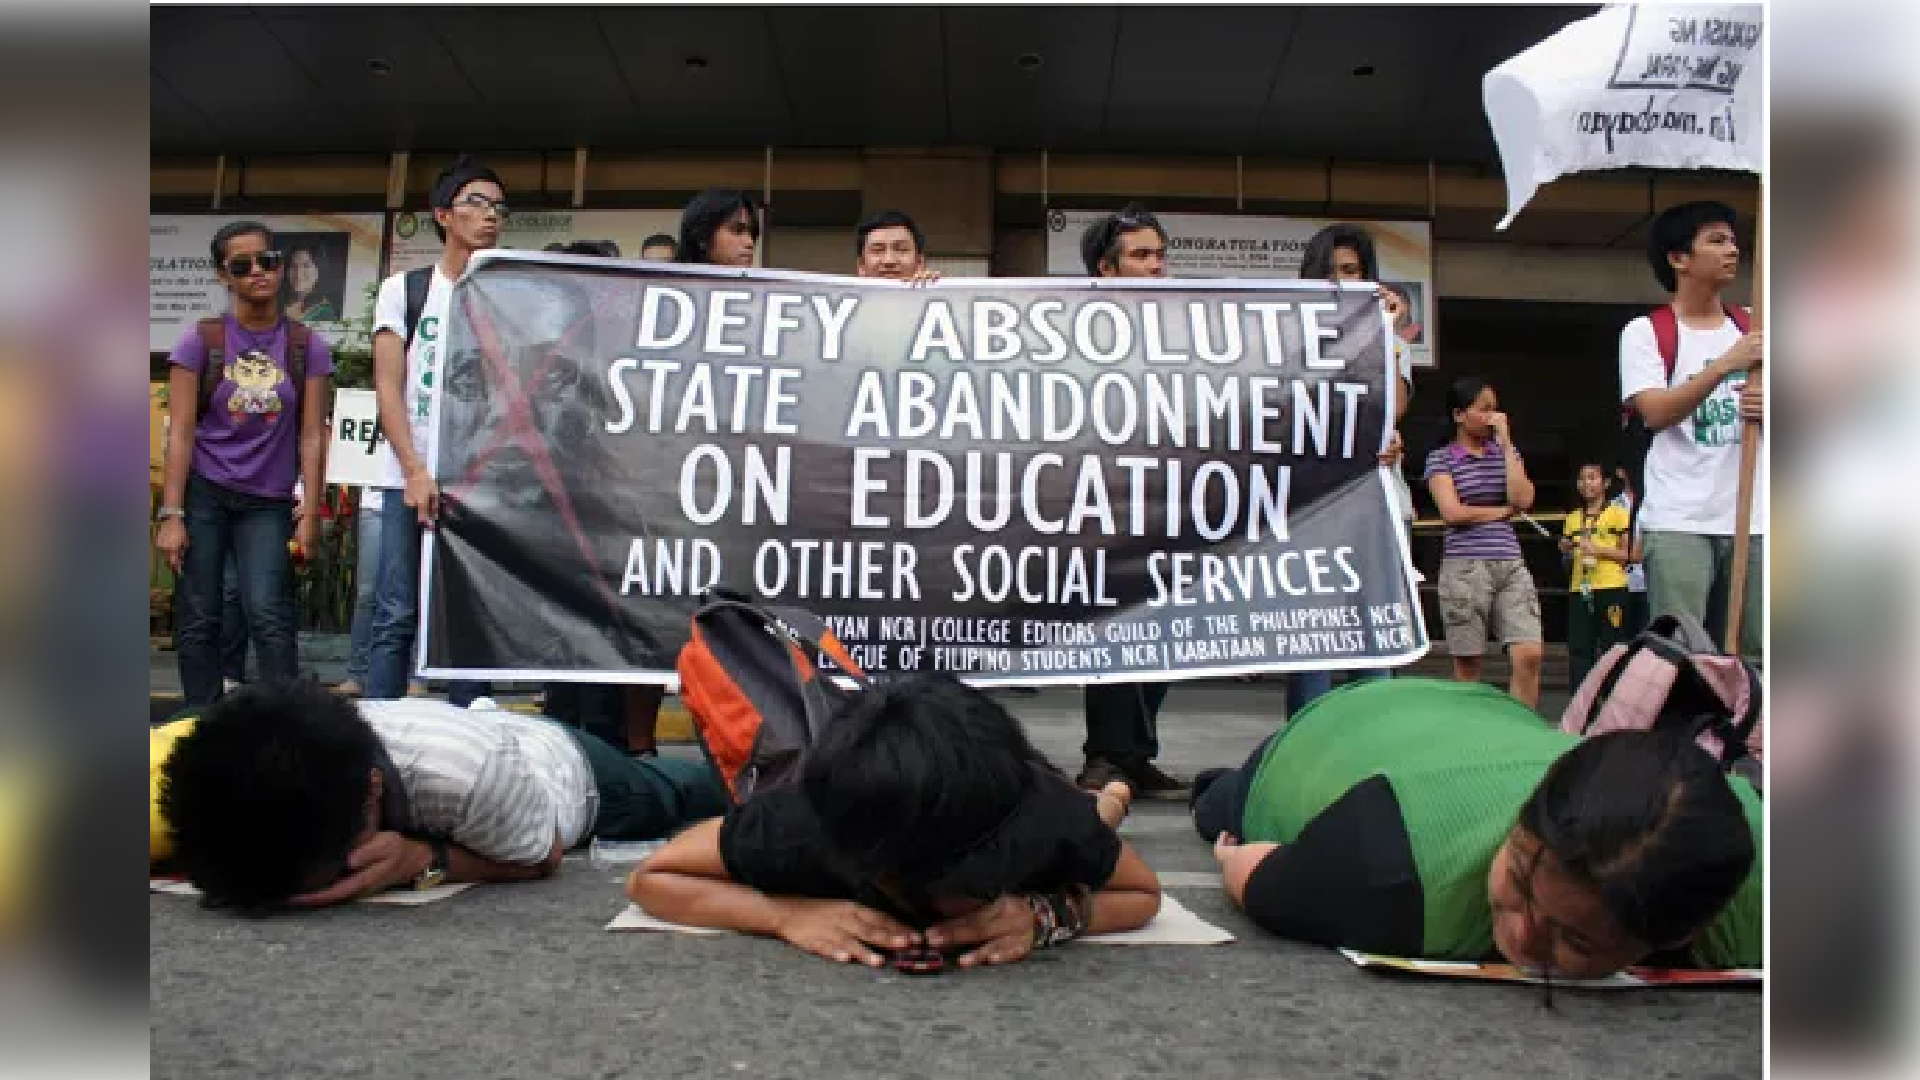 Students at UP object to the growing commercialization of university areas.